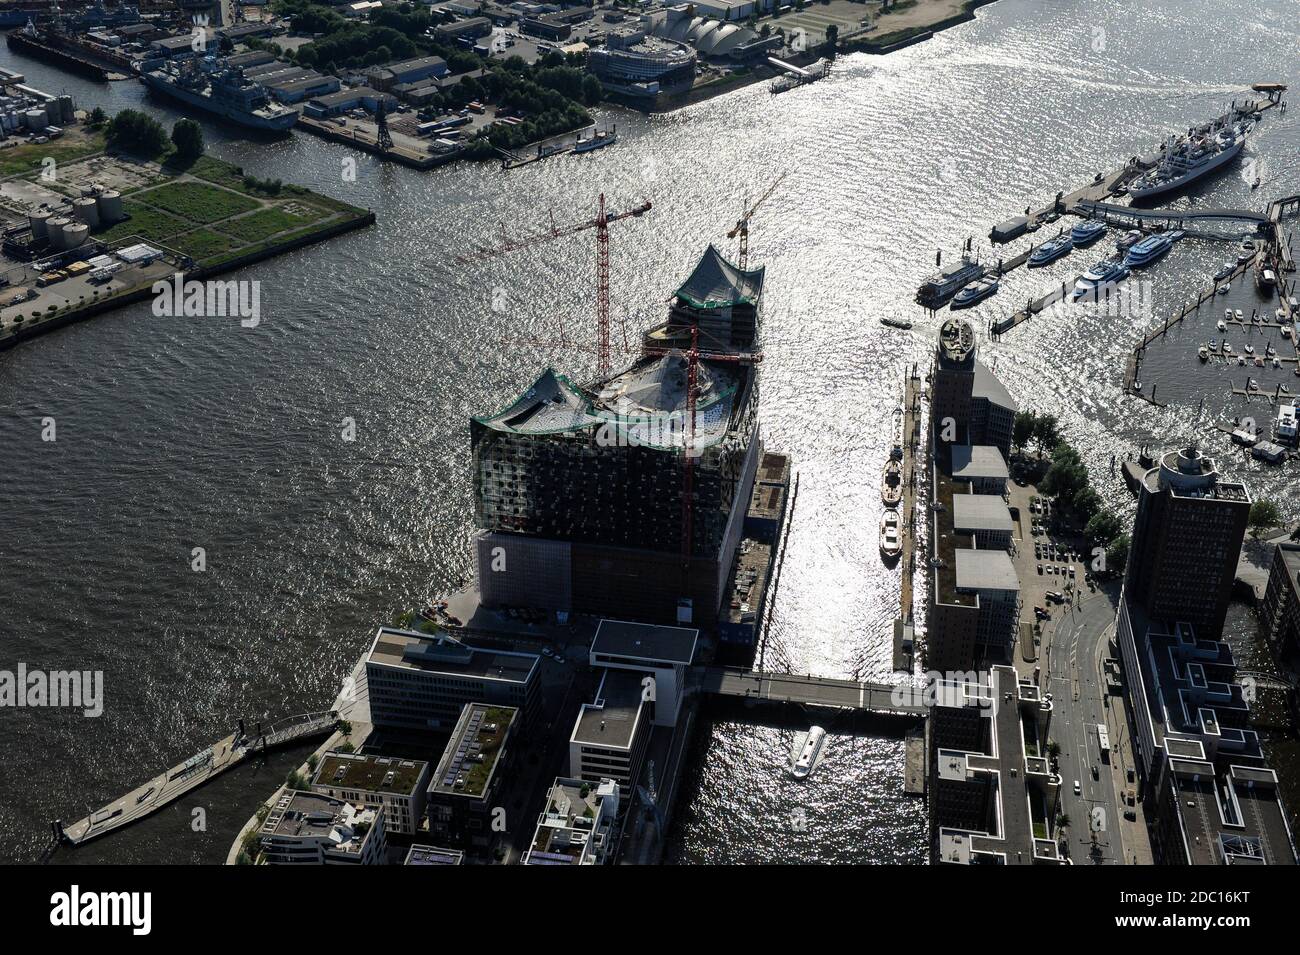 GERMANY, Hamburg, aerial view of HafenCity Harbour City at the river Elbe and the Speicherstadt, with Elbphilharmonie a new Philharmonic Hall / DEUTSCHLAND, Hamburg, Hafencity, Fluß Elbe, Speicherstadt, Baustelle Elbphilharmonie im Jahr 2013 Stock Photo